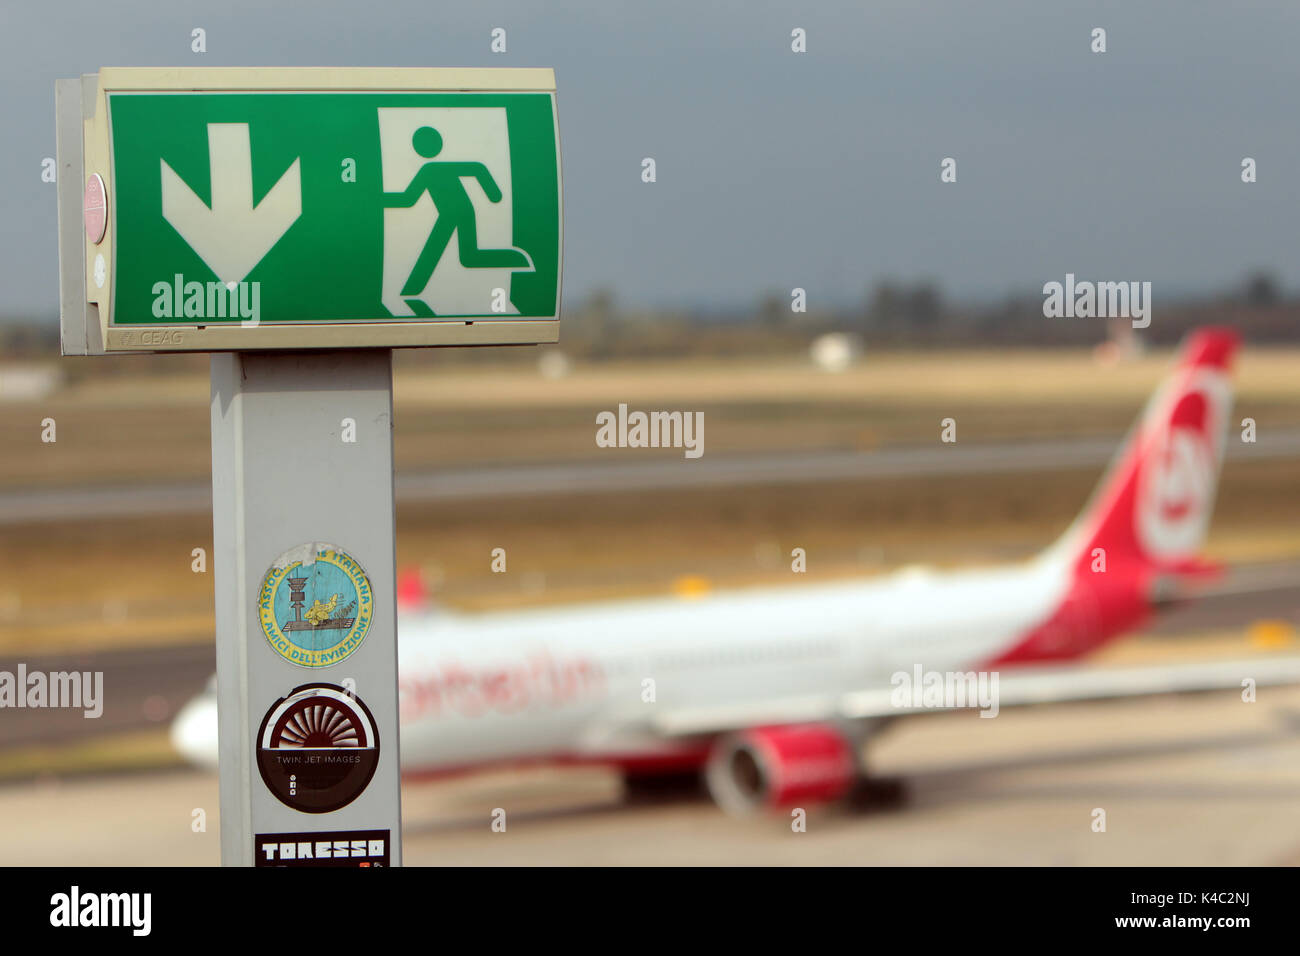 Crisis At Airberlin Airbus A320 With Emergency Exit Sign At Airport Duesseldorf Stock Photo